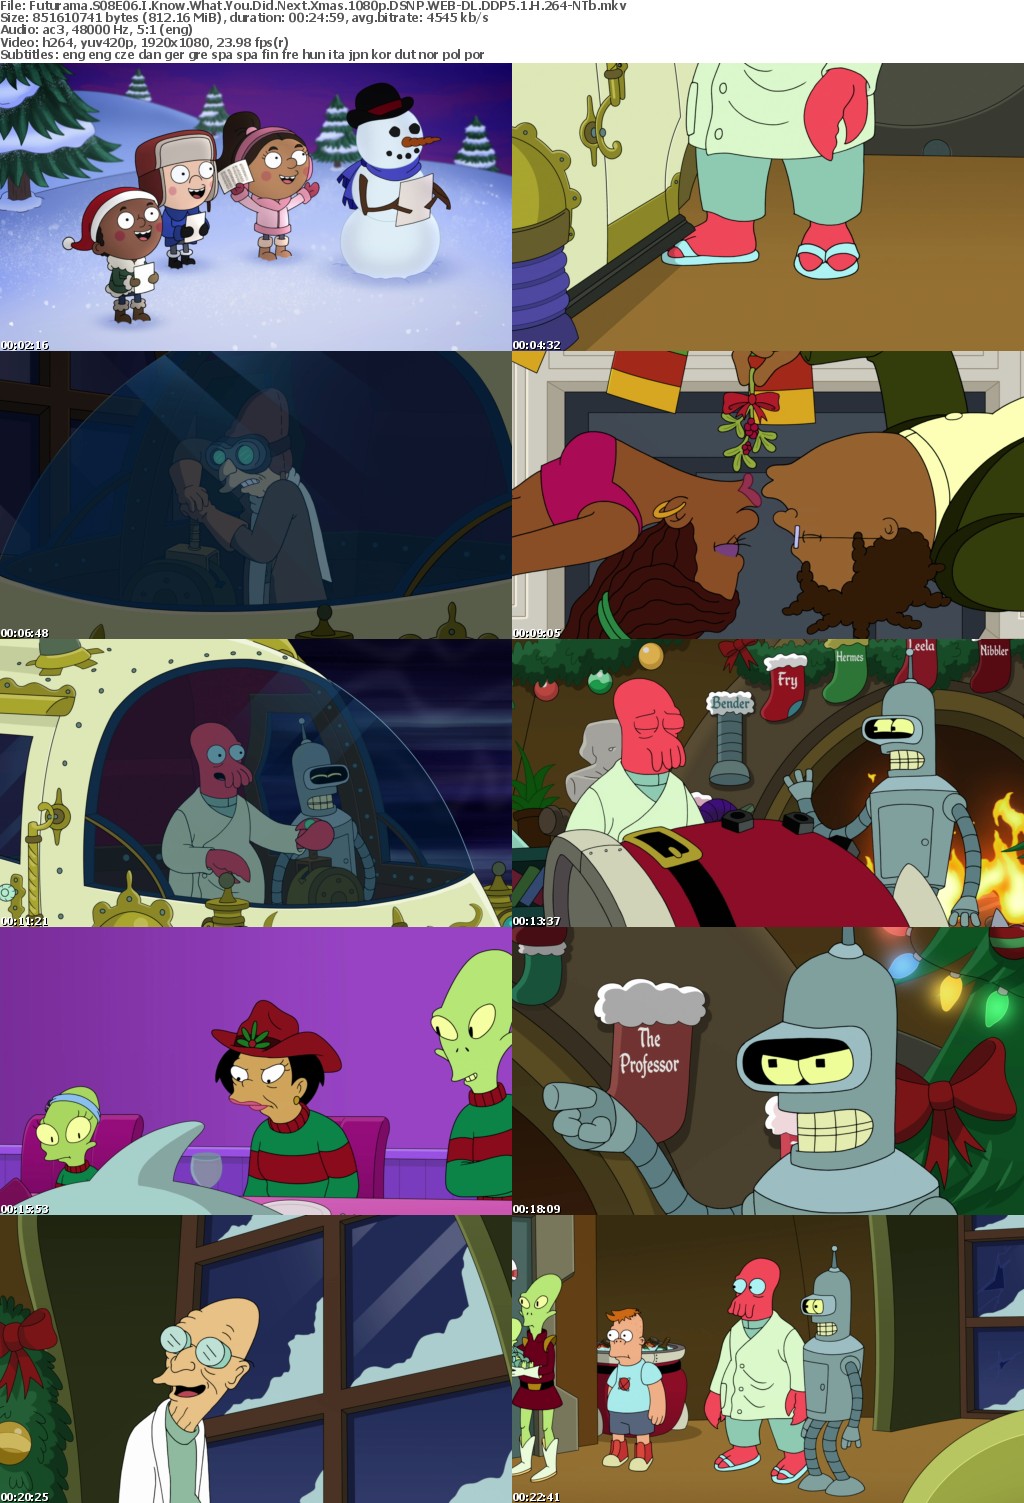 Futurama S08E06 I Know What You Did Next Xmas 1080p DSNP WEB-DL DDP5 1 H 264-NTb